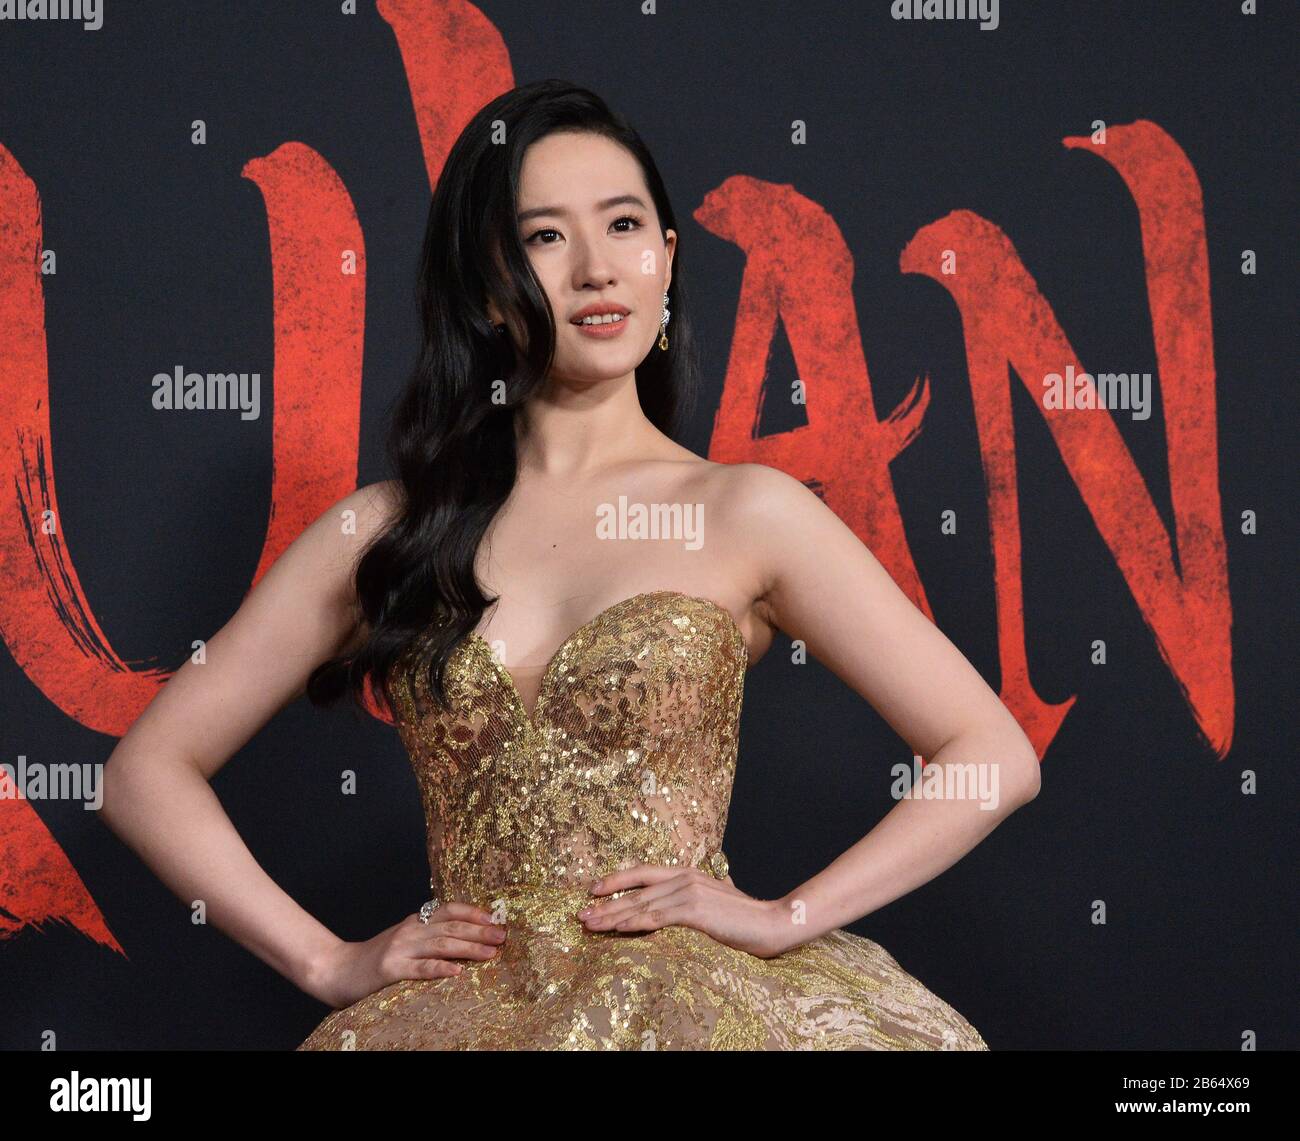 Los Angeles, United States. 9th Mar, 2020. Cast member Yifei Liu attends the premiere of the motion picture adventure drama 'Mulan' at the Dolby Theatre in the Hollywood section of Los Angeles on Monday, March 9, 2020. Storyline: A young Chinese maiden disguises herself as a male warrior in order to save her father. Photo by Jim Ruymen/UPI Credit: UPI/Alamy Live News Stock Photo